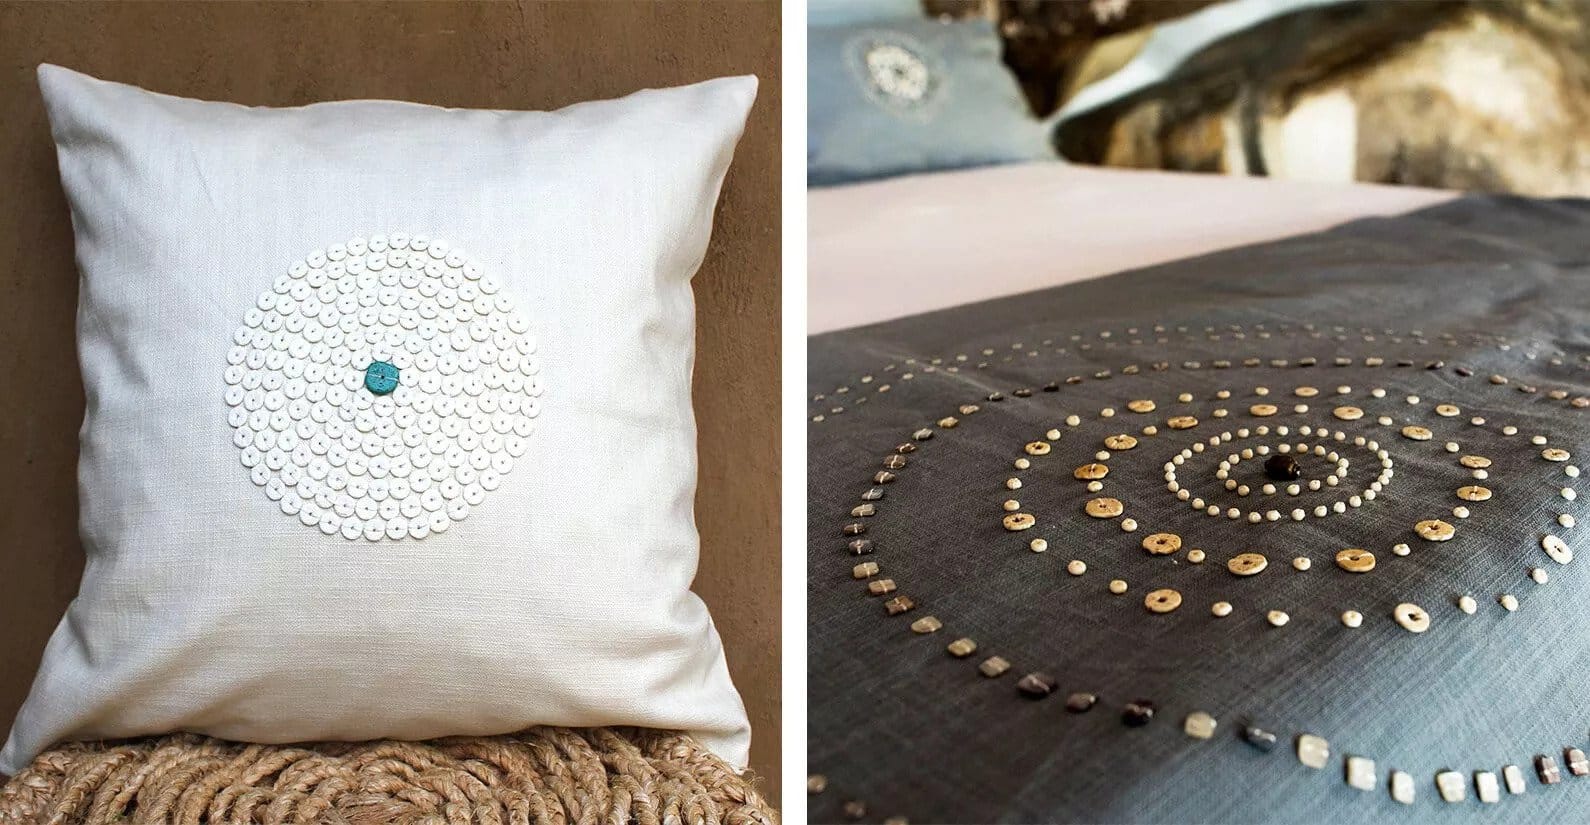 Hand-beaded cushion covers and bed throws